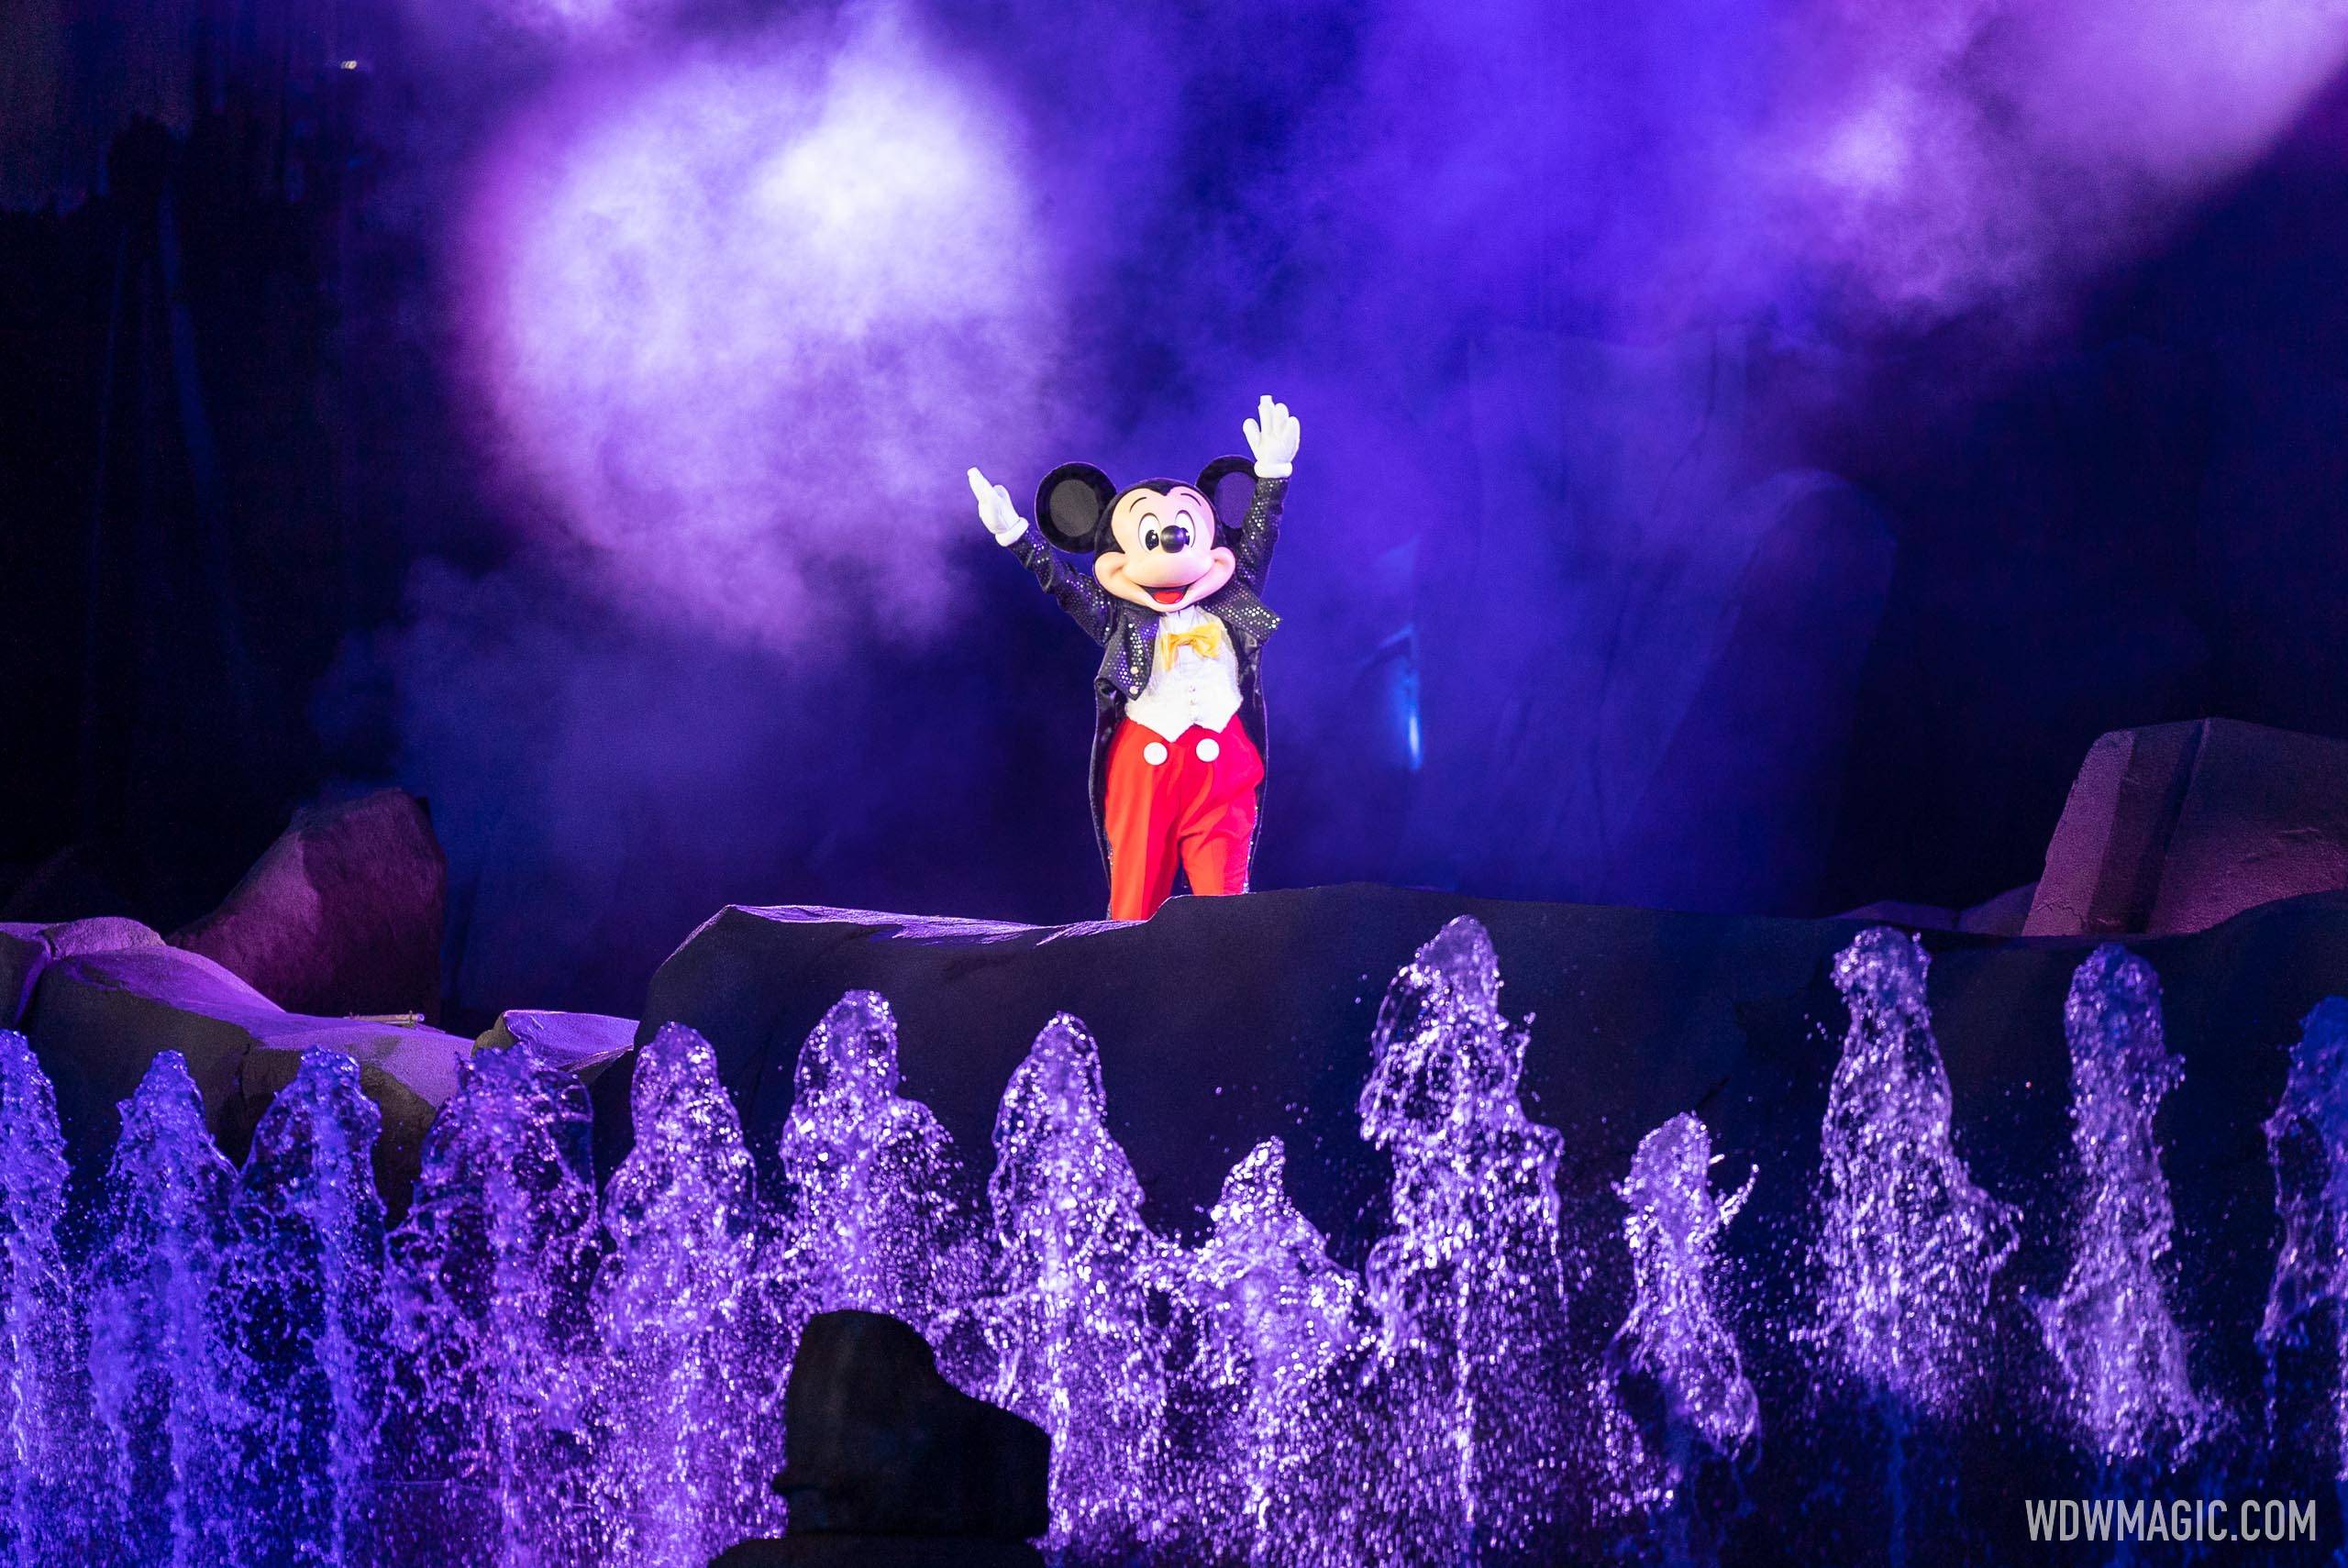 Disney offering new Fantasmic Dessert and VIP Viewing Experience